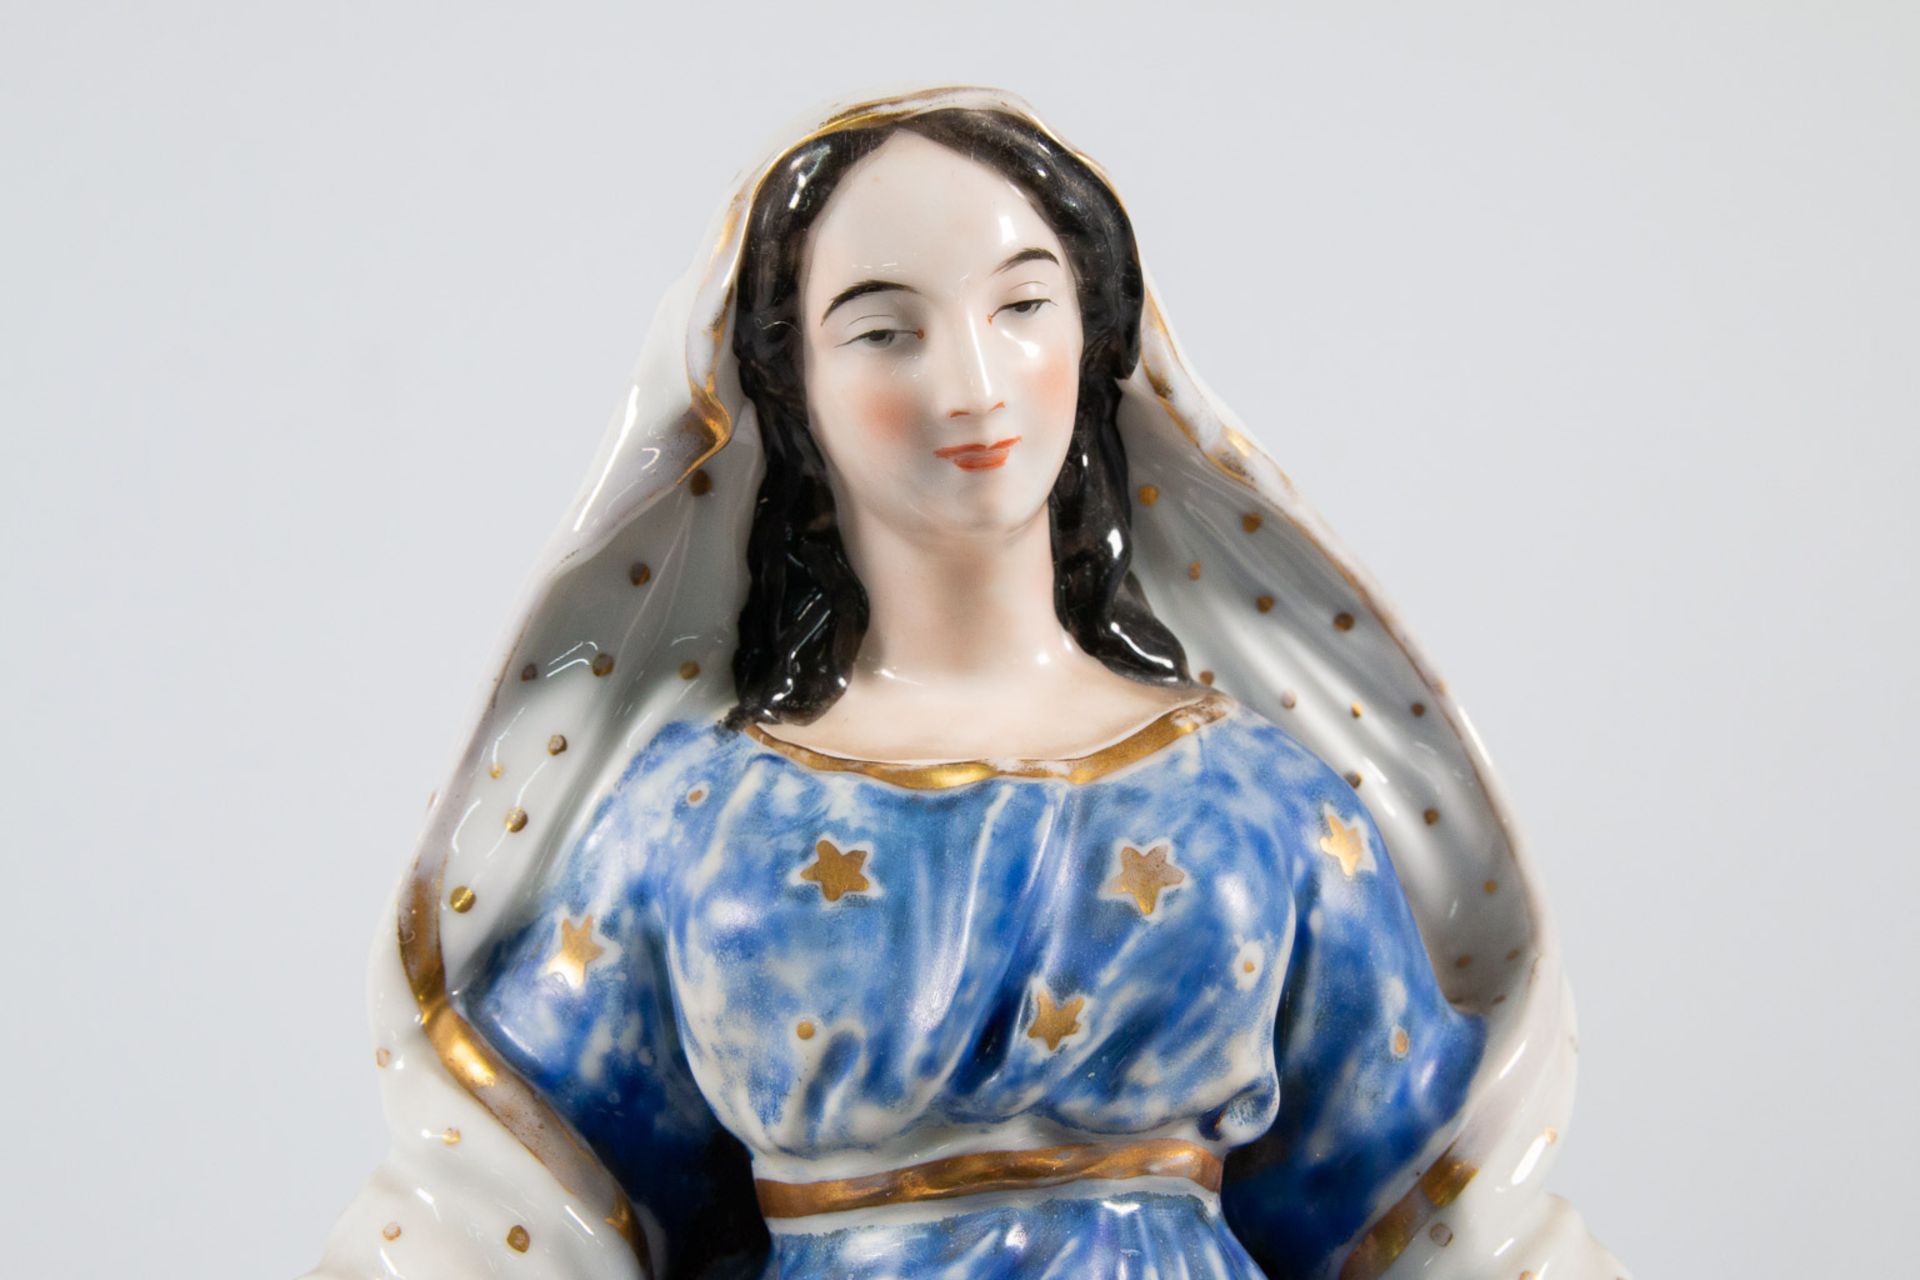 Madonna made of porcelain, 19th century - Image 14 of 18